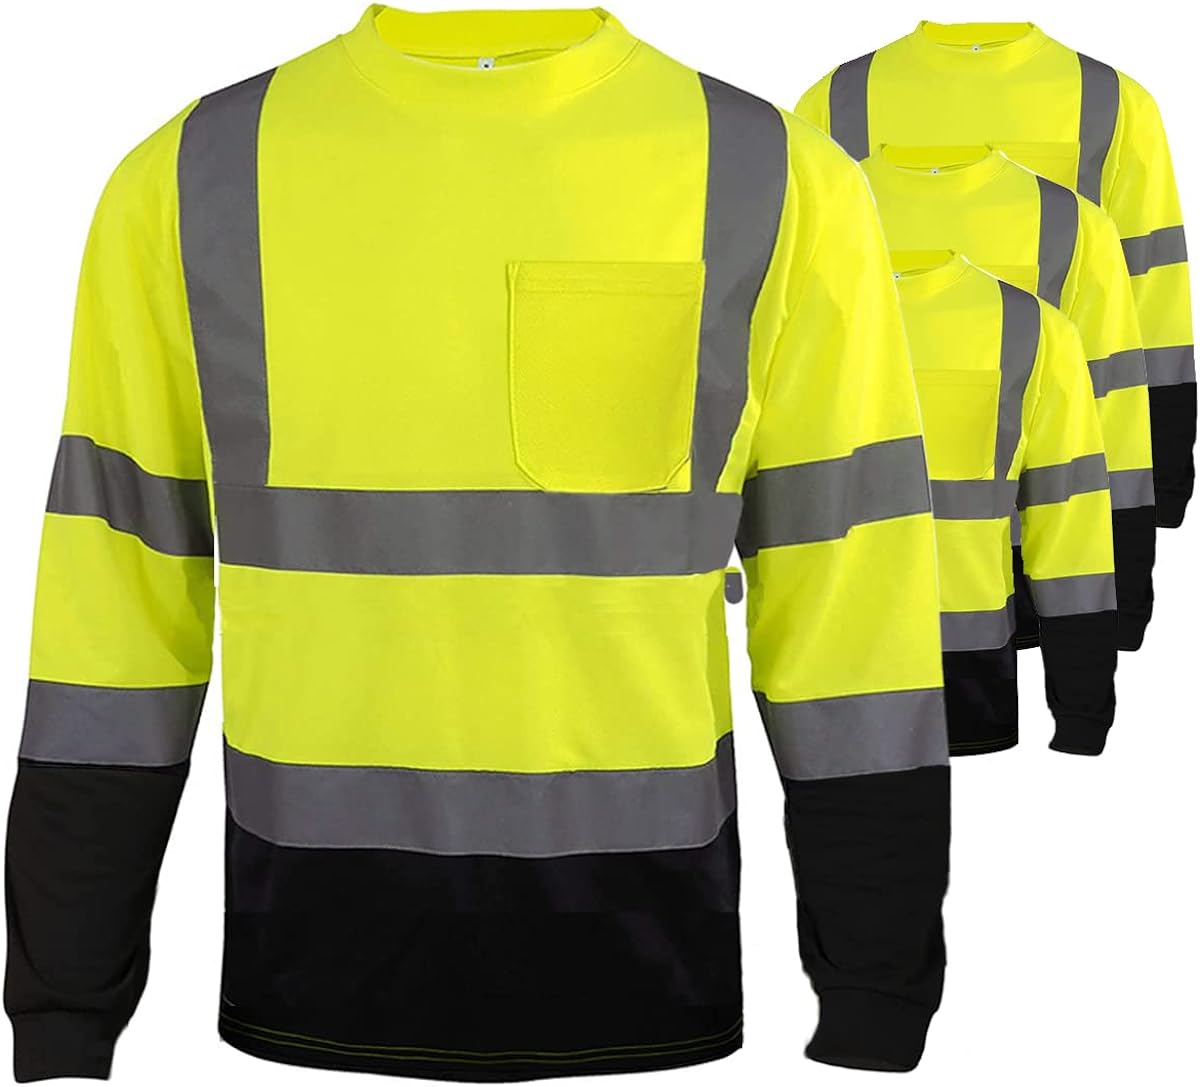 Generic CAMNWAMN 4 Pack XL-Size Class 3 High Visibility Shirts Hi Vis Reflective Safety Shirts Long Sleeve High Visibility Construction